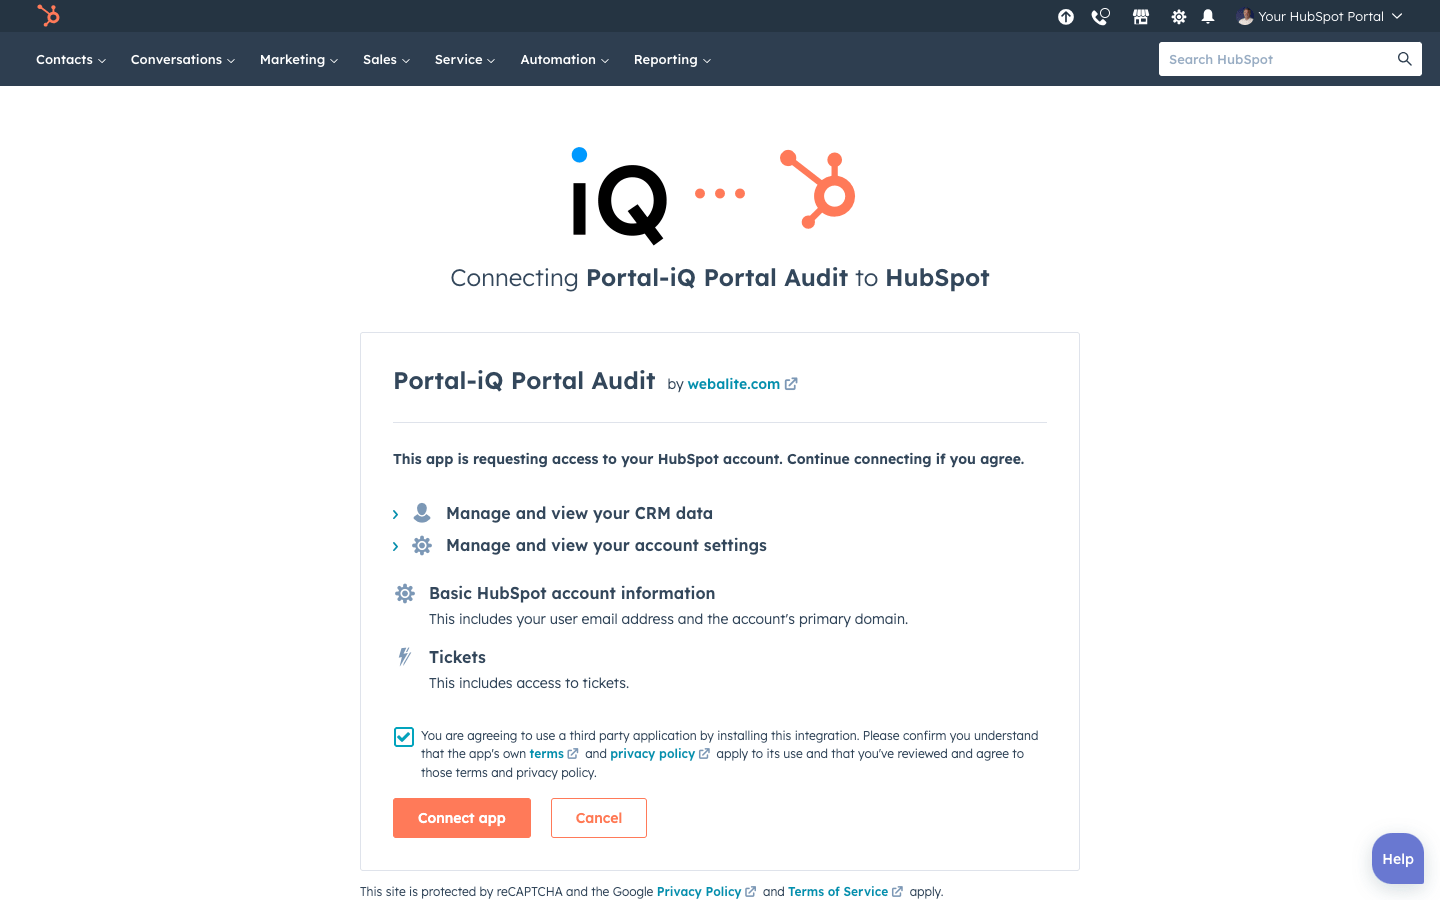 Portal-iQ Checkout - Step 2 - connect the app with HubSpot